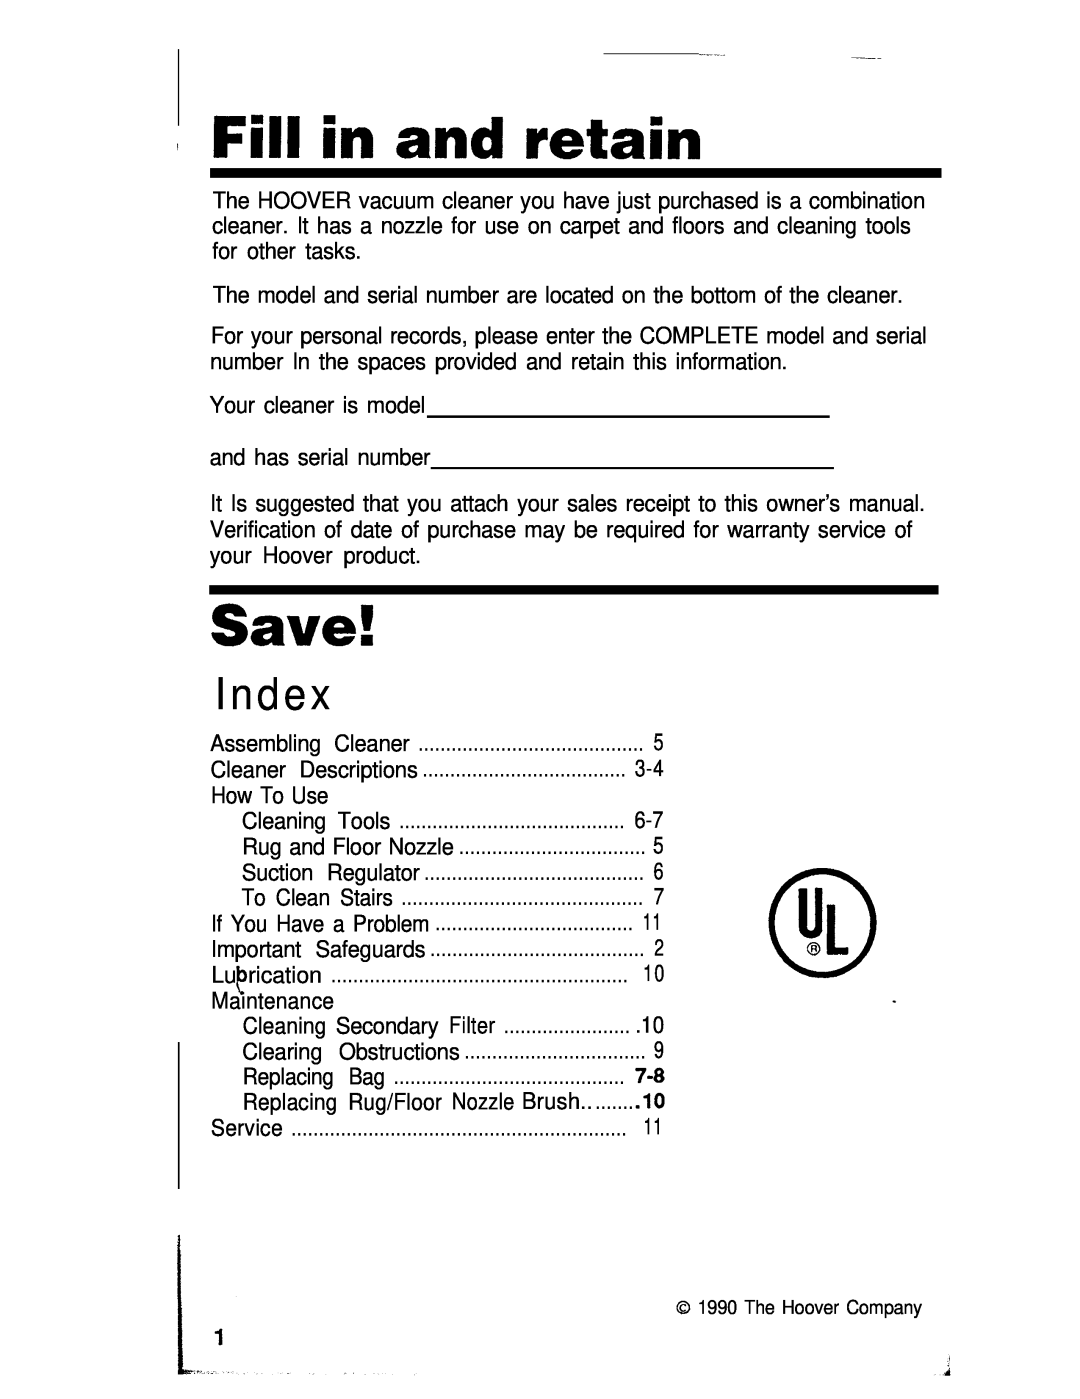 Hoover S3617, S3627 manual Index, Fill in and retain, Save 